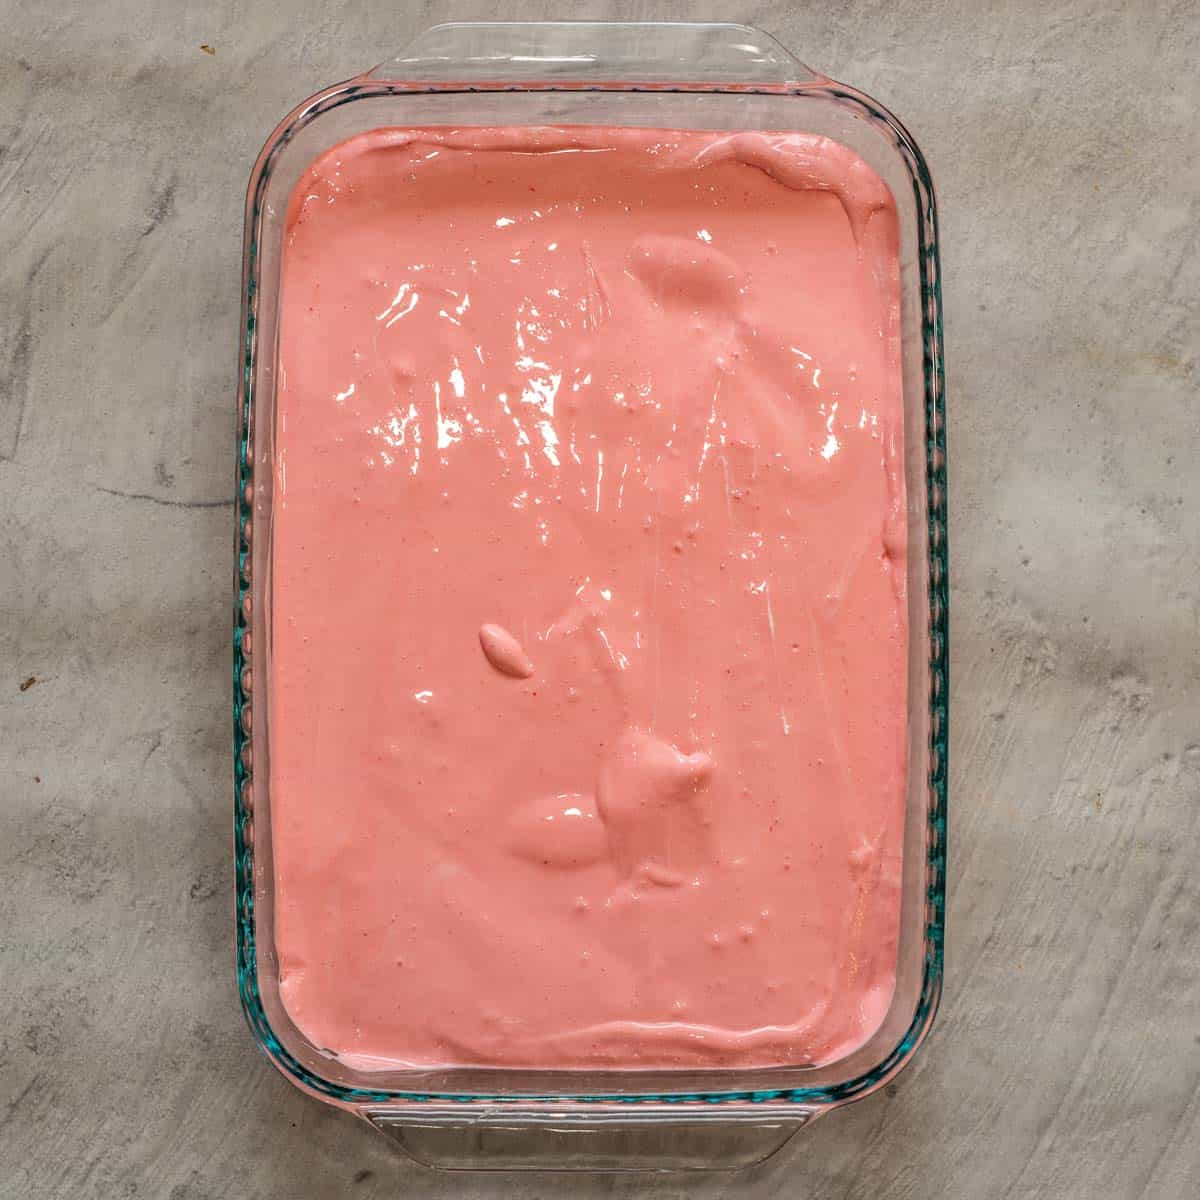 A baking dish with the pink creamy layer of jello on it.